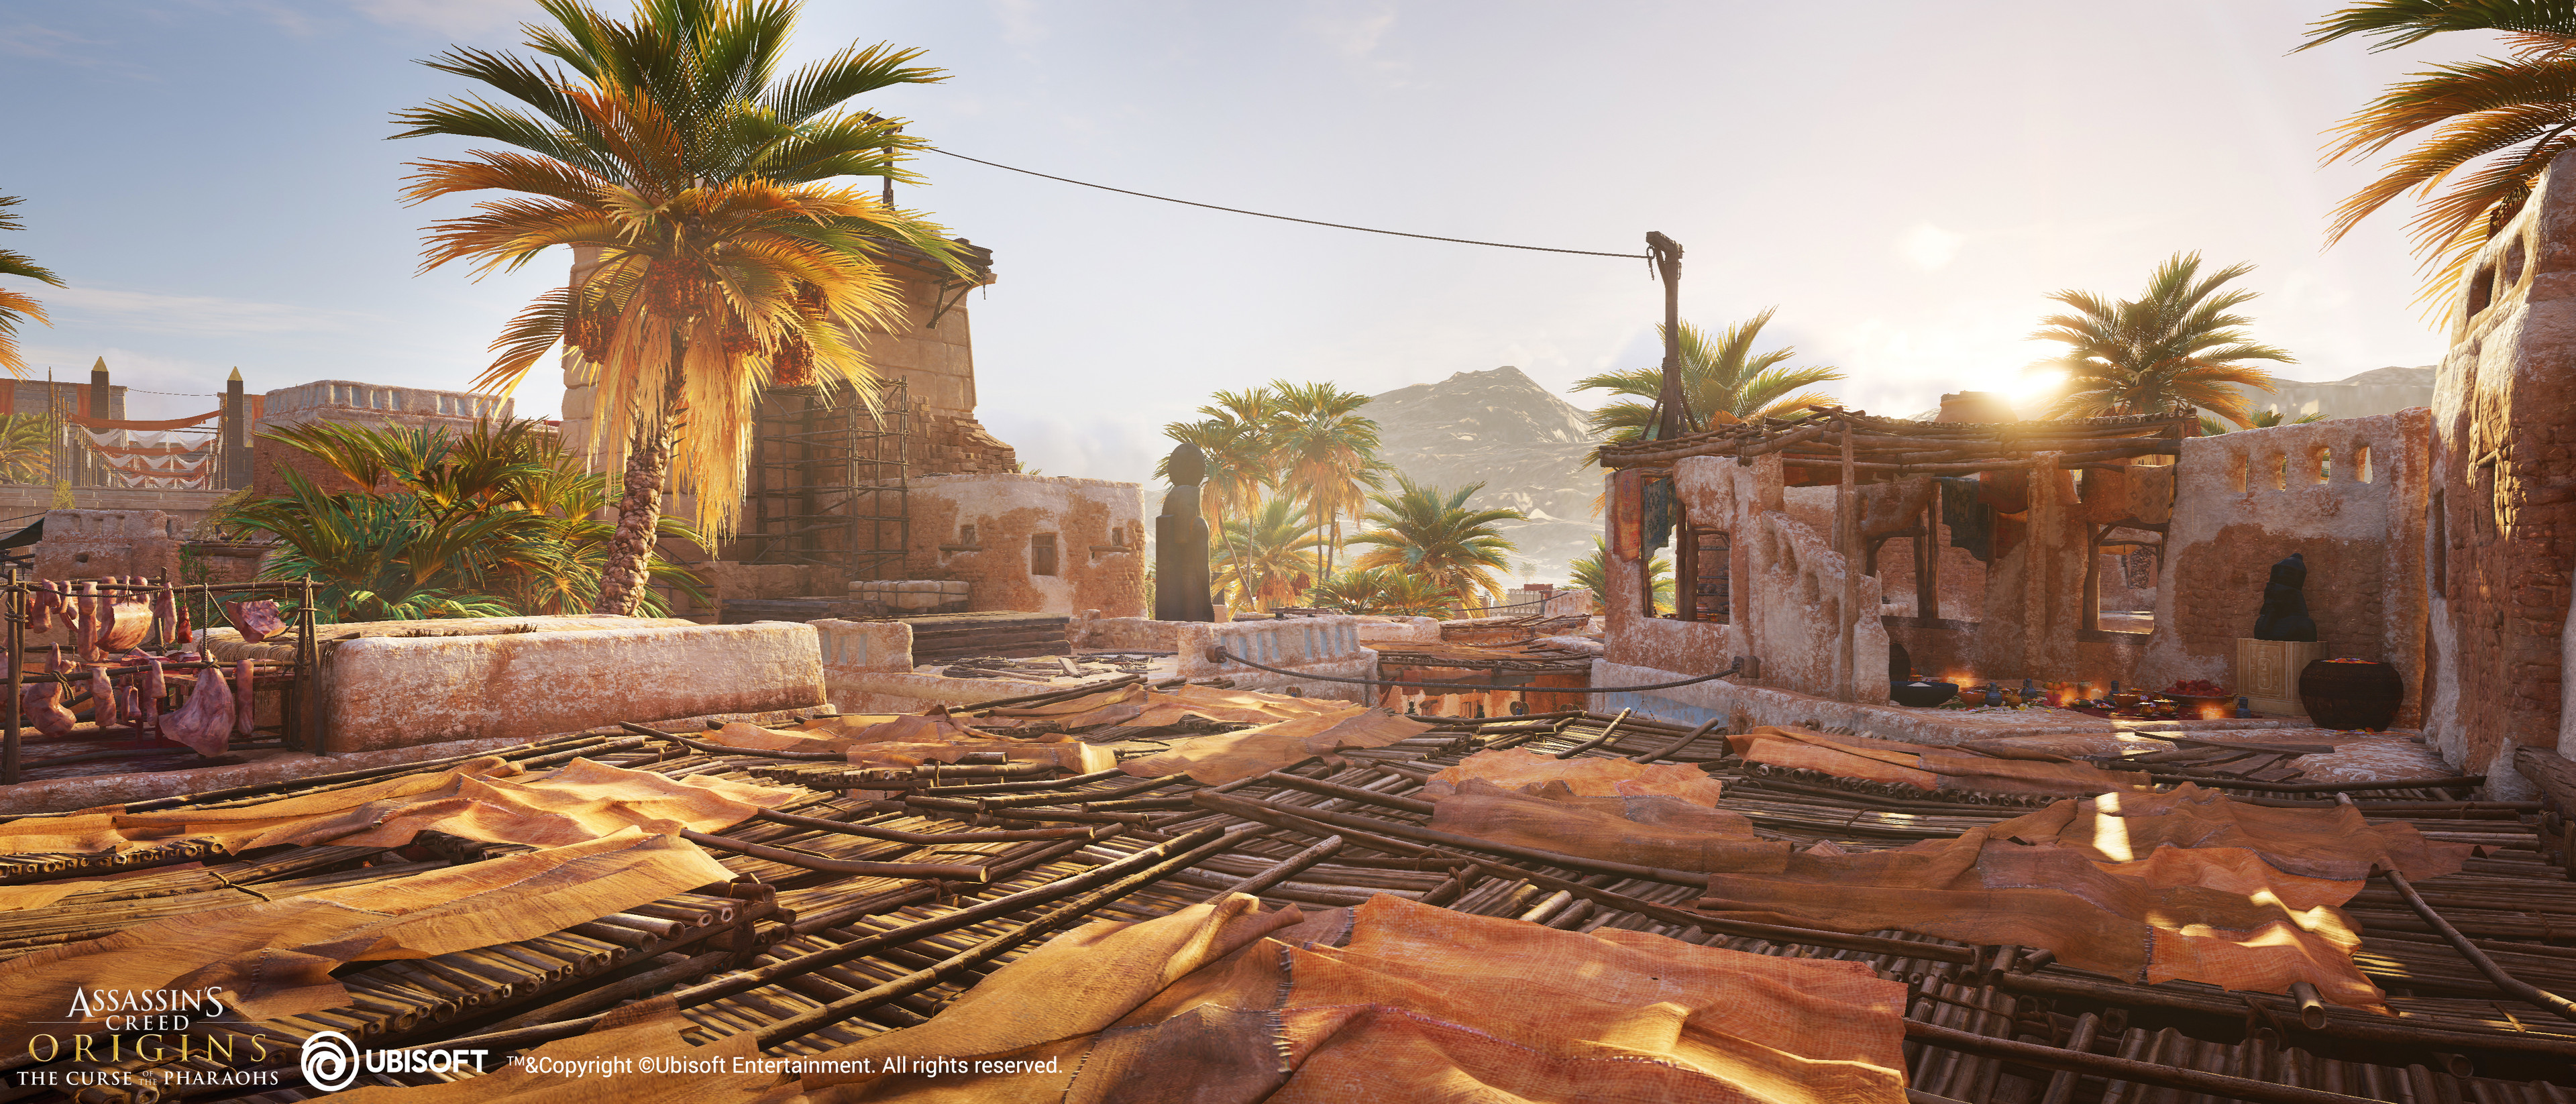 ArtStation - Assassin's Creed Origins - The curse of the pharaohs DLC  Thematic Locations